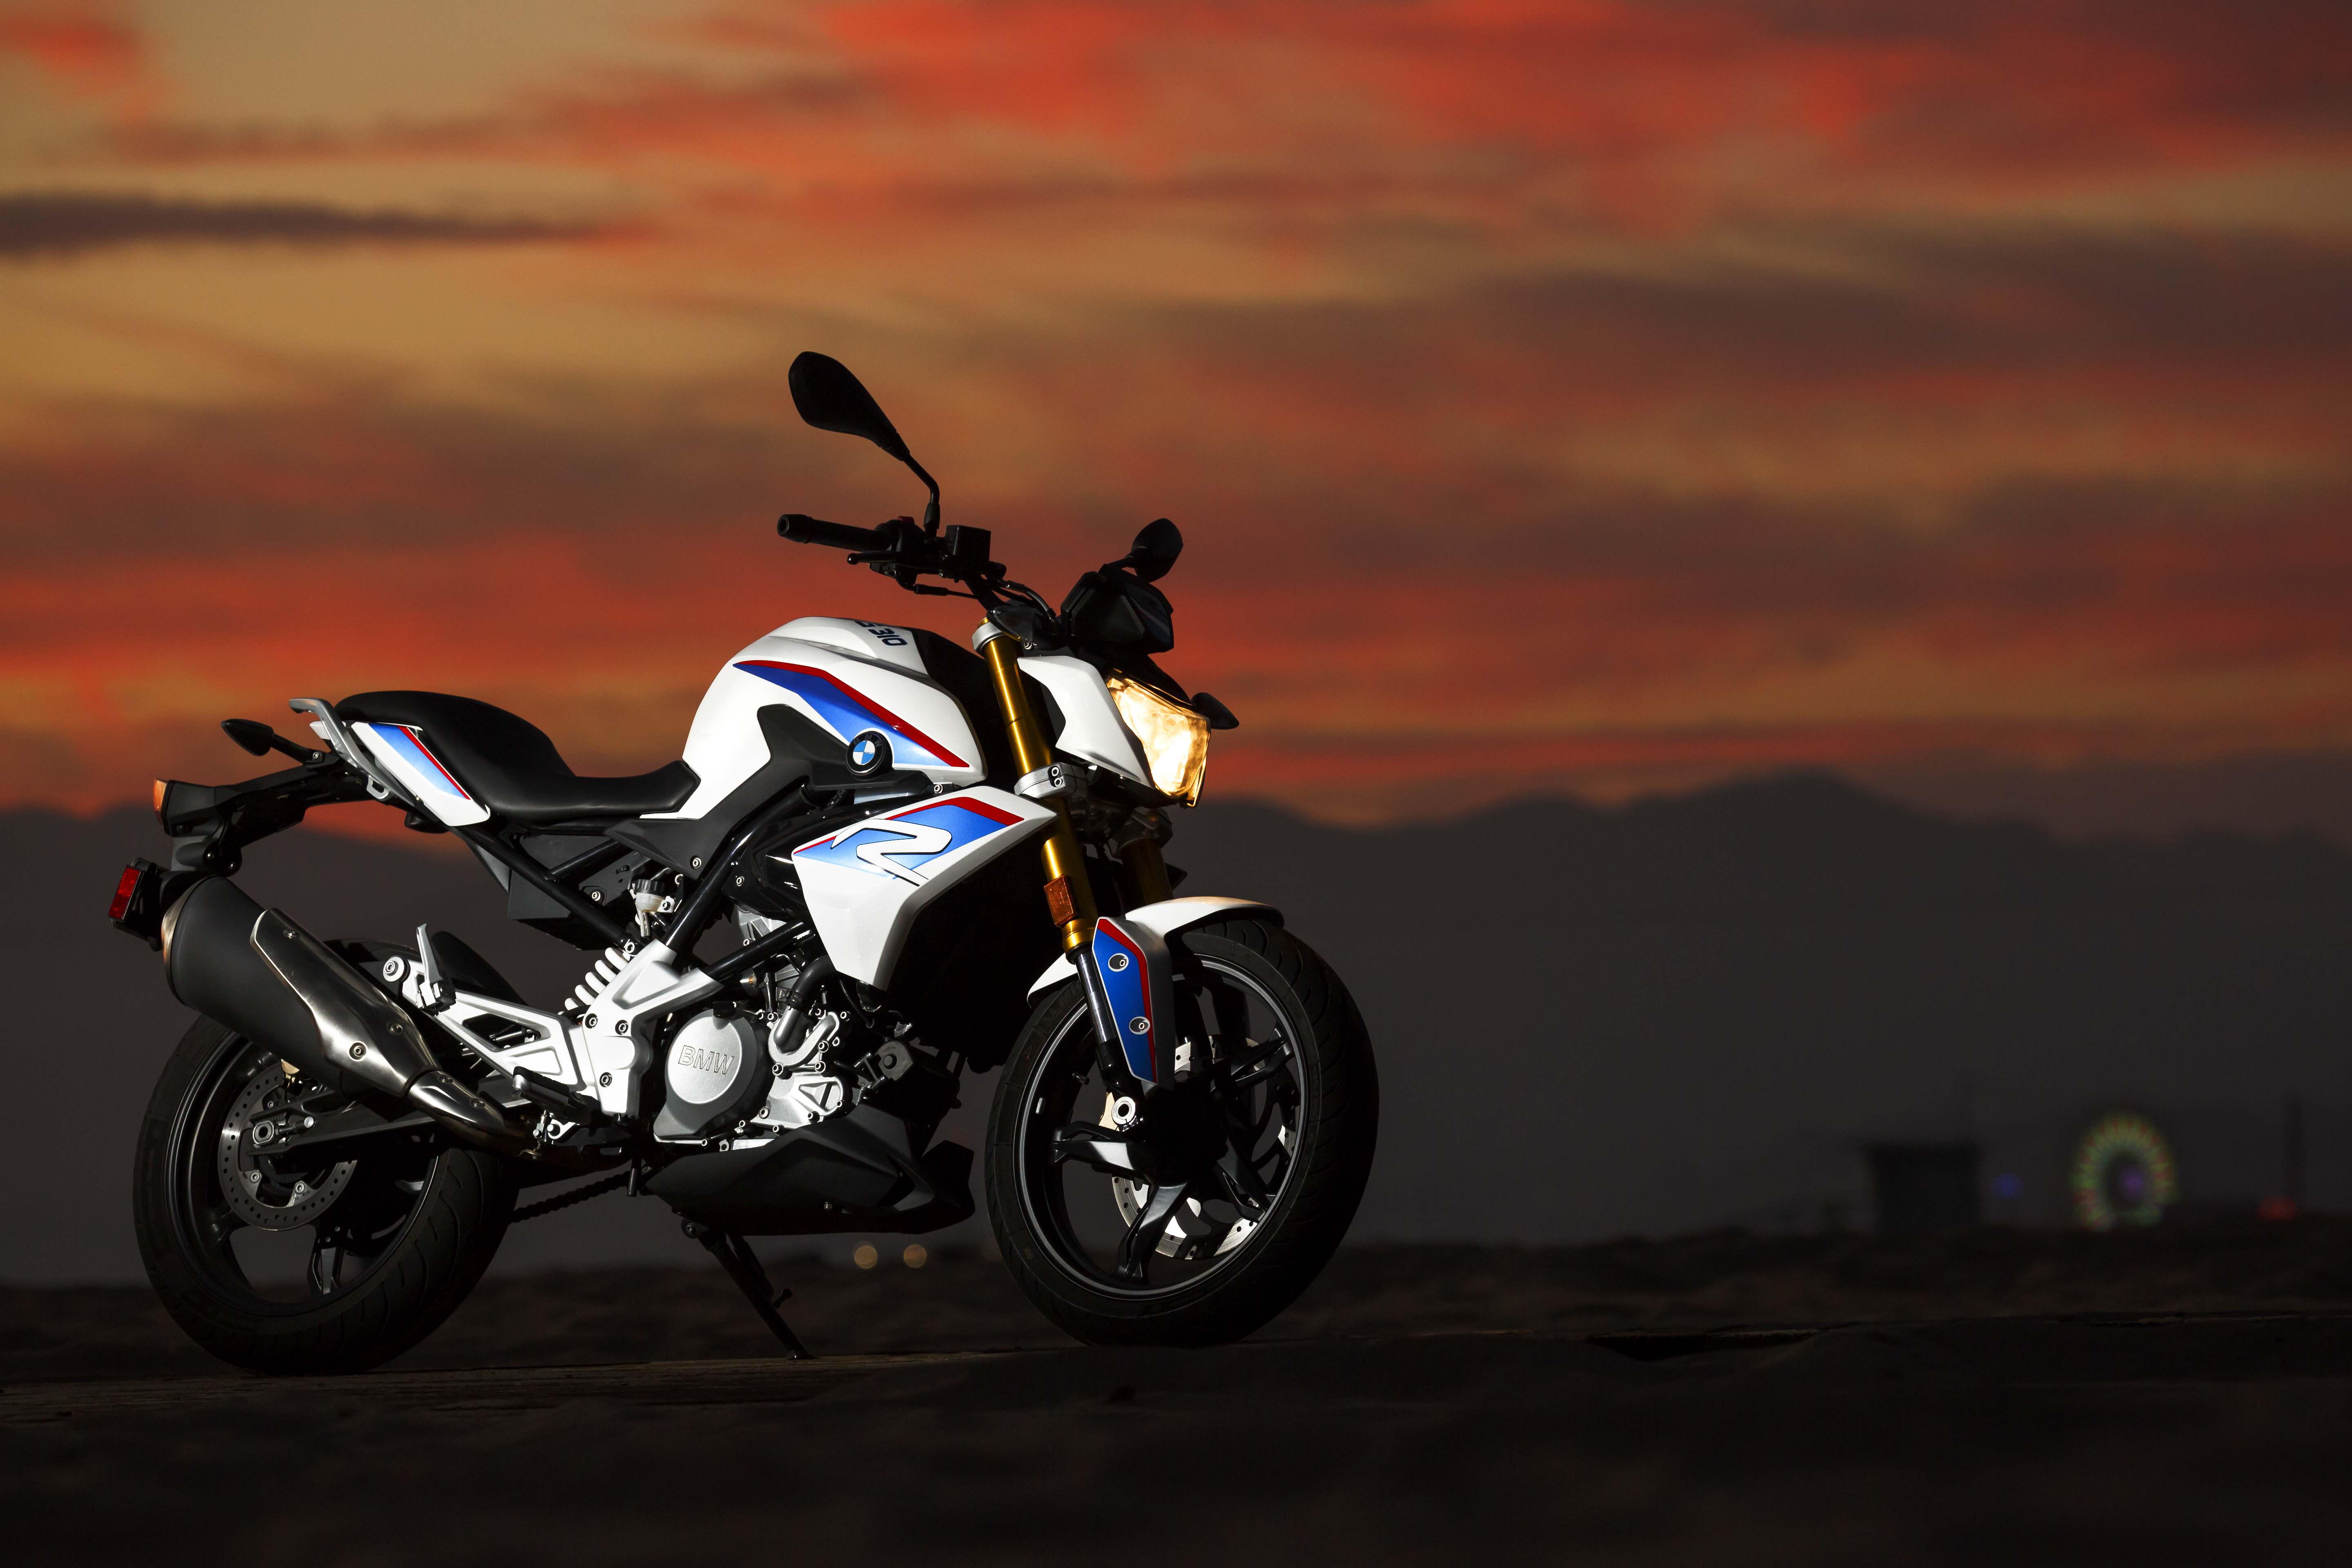 BMW G 310 R Preview - BMW's newest roadster priced from RM 26,900